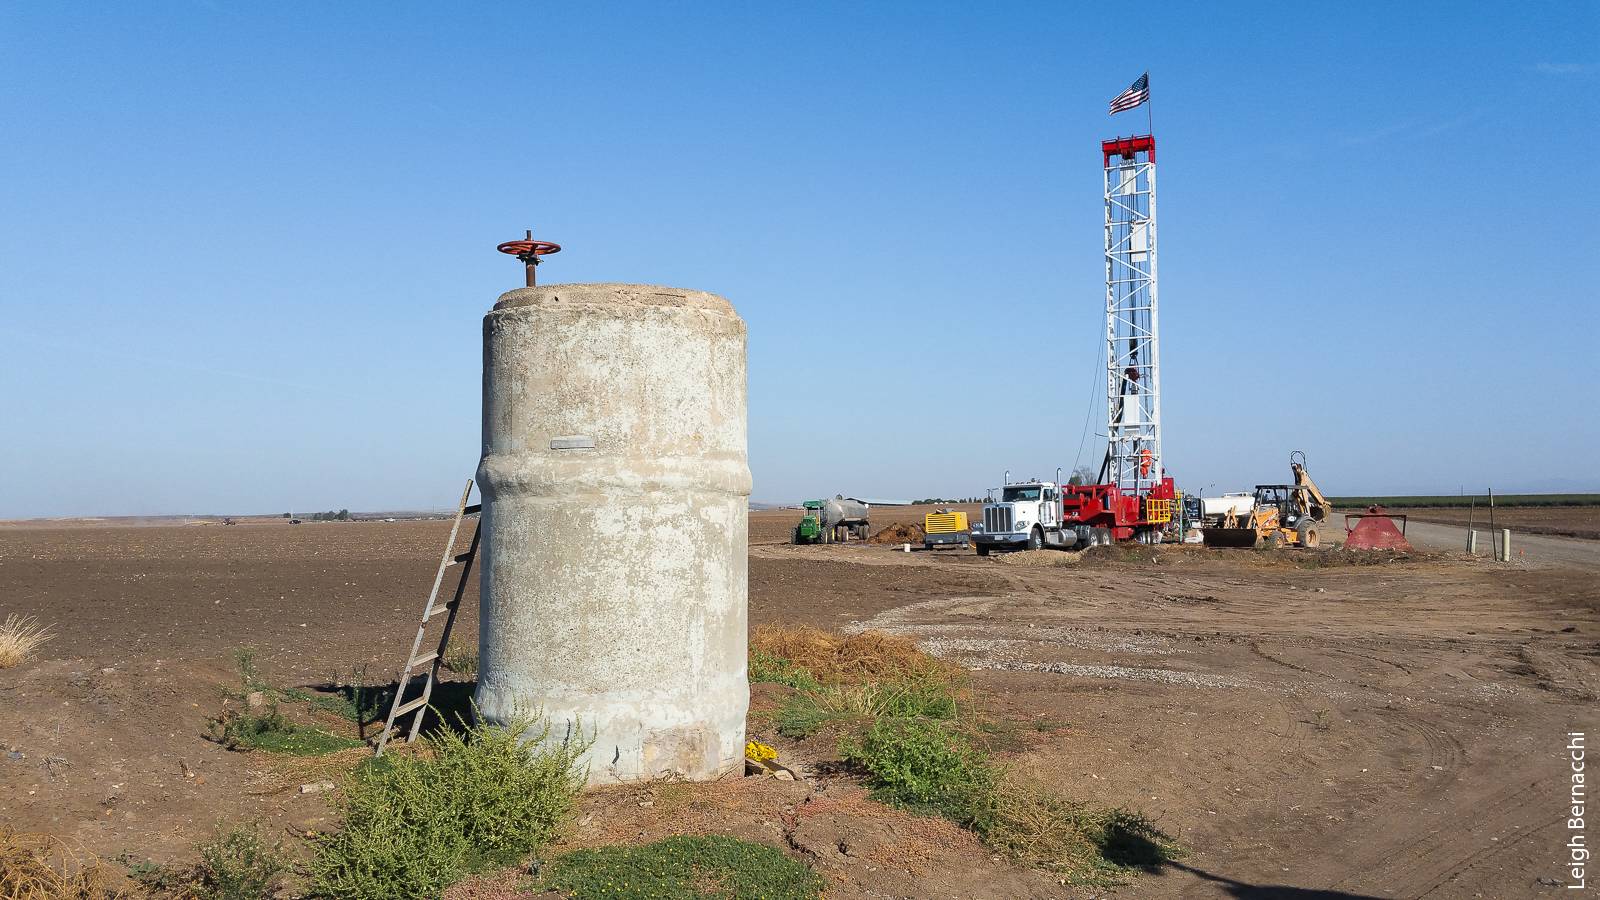 A rig drills a new well in Merced County. In the foreground is a pressure relief structure for subsurface water pipes.